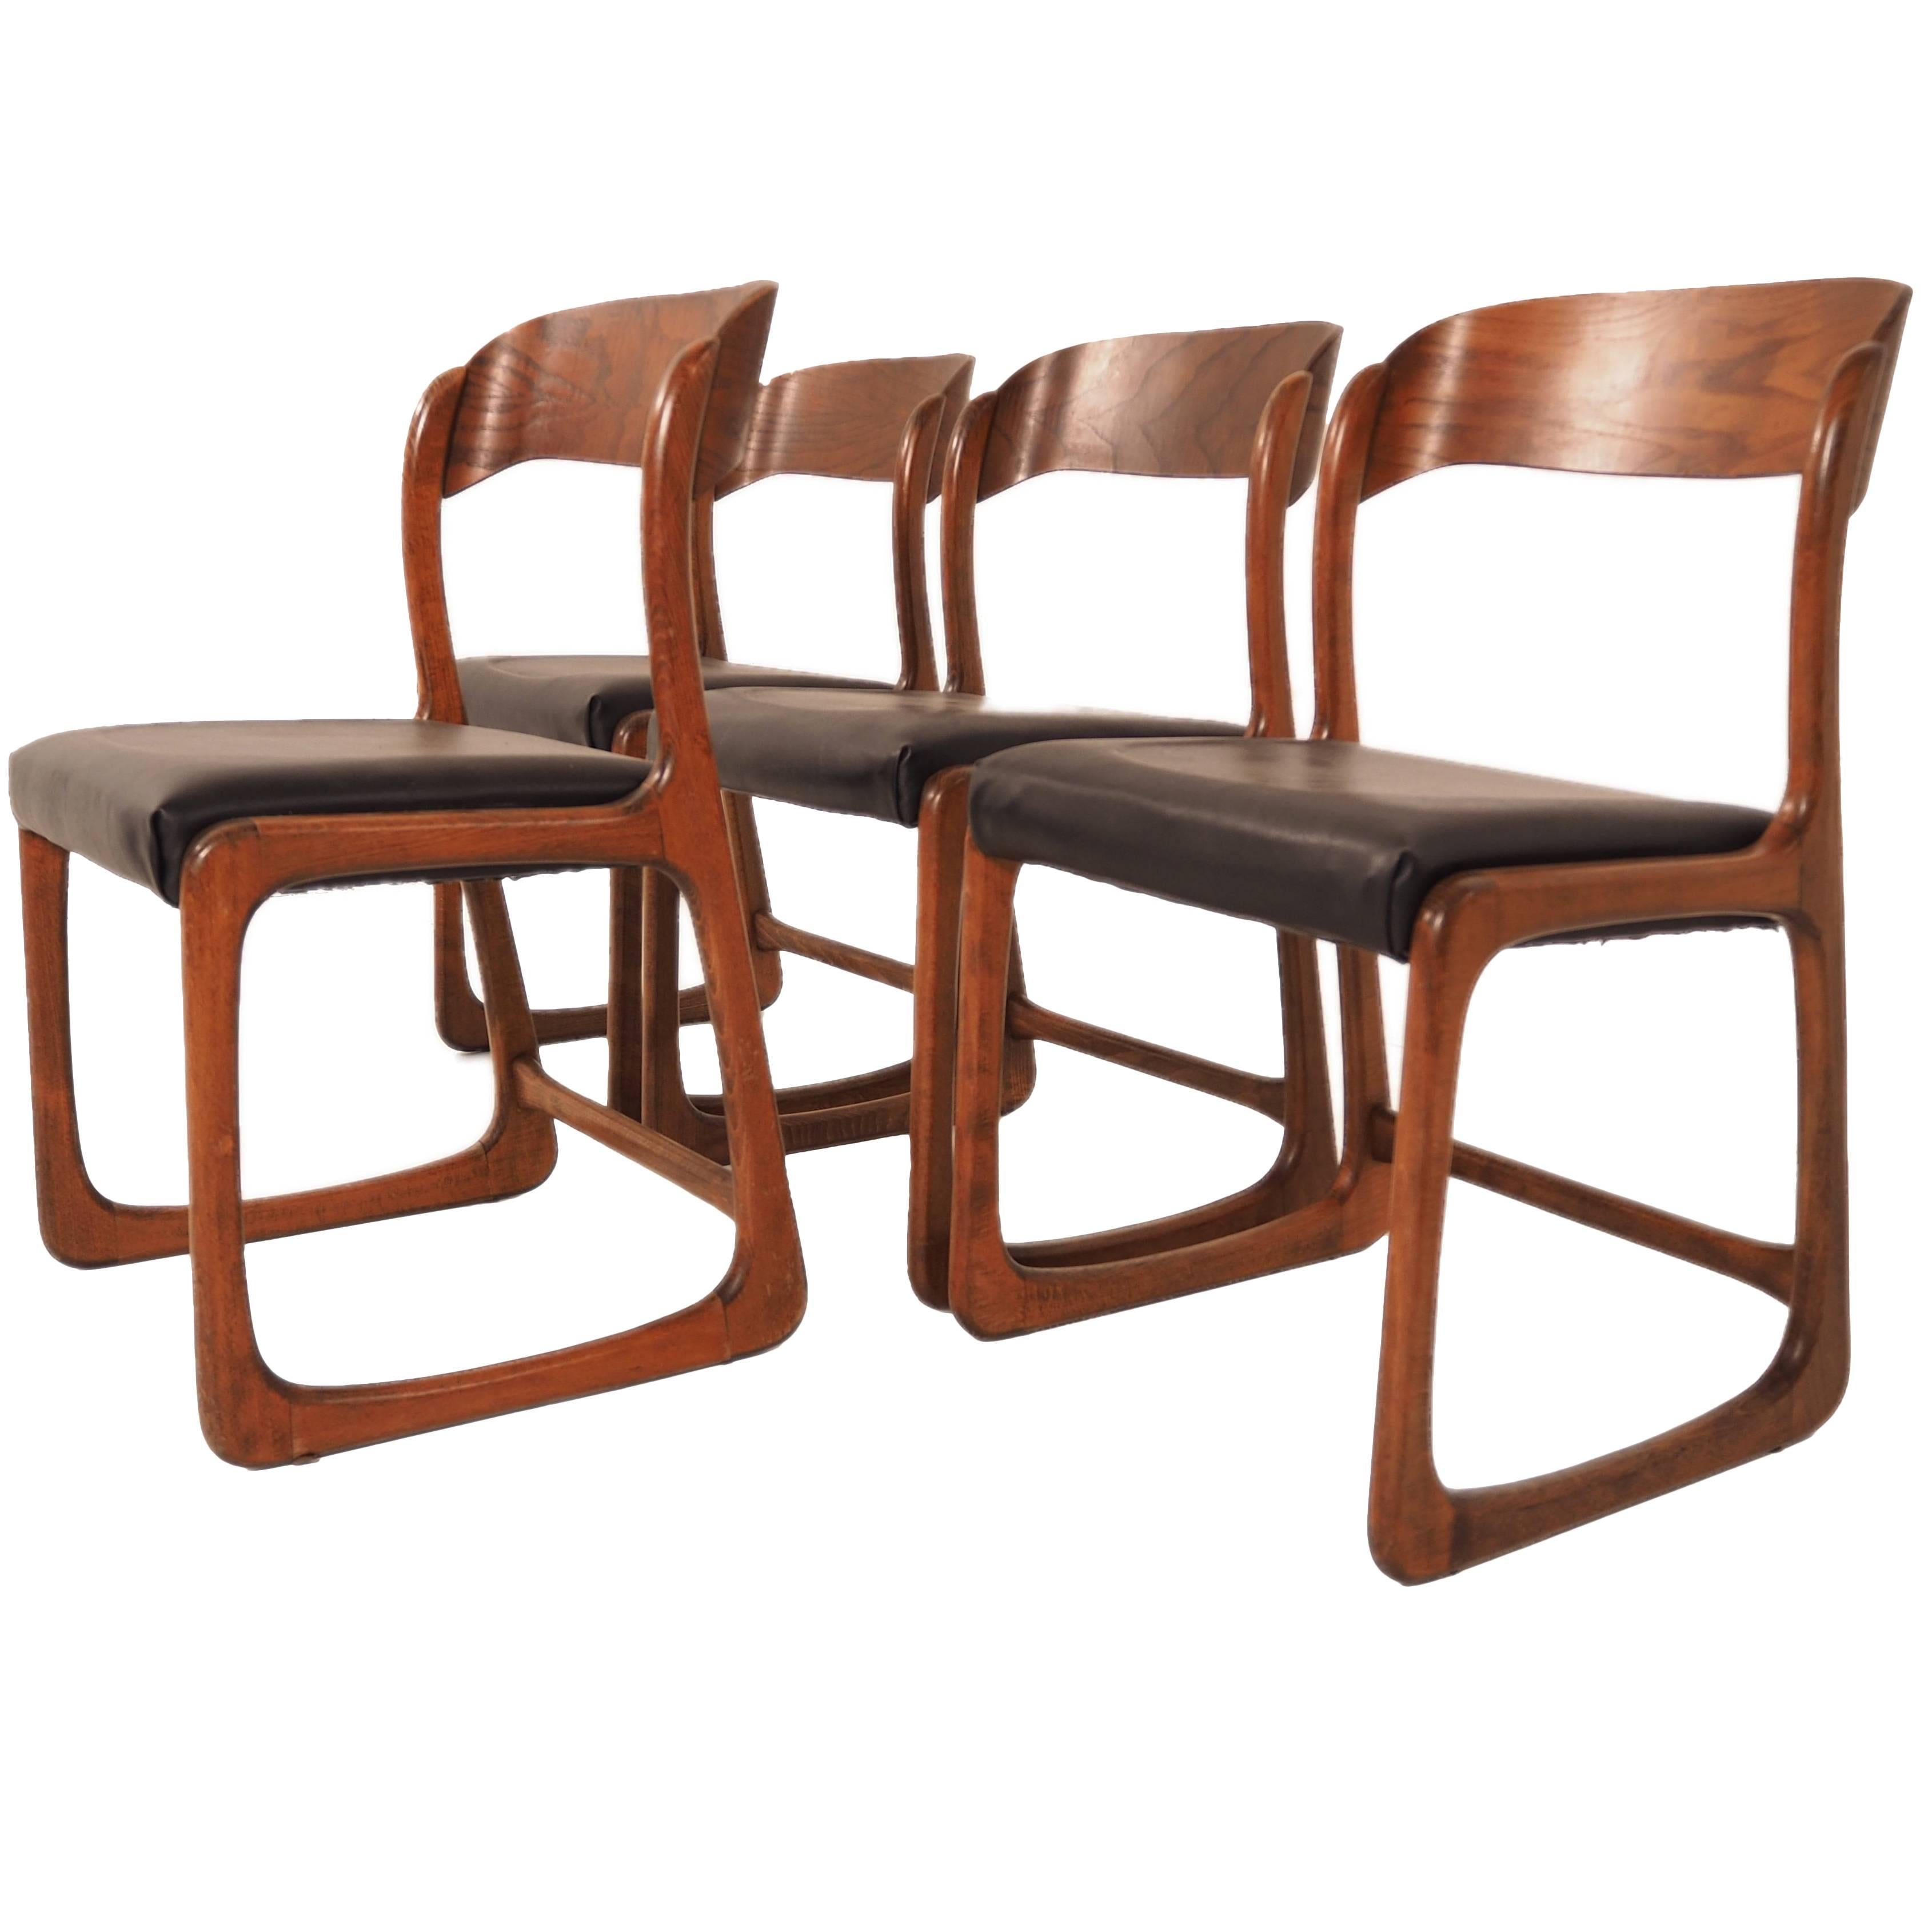 Set of Four Baumann Dining Room Chairs, 1970s For Sale